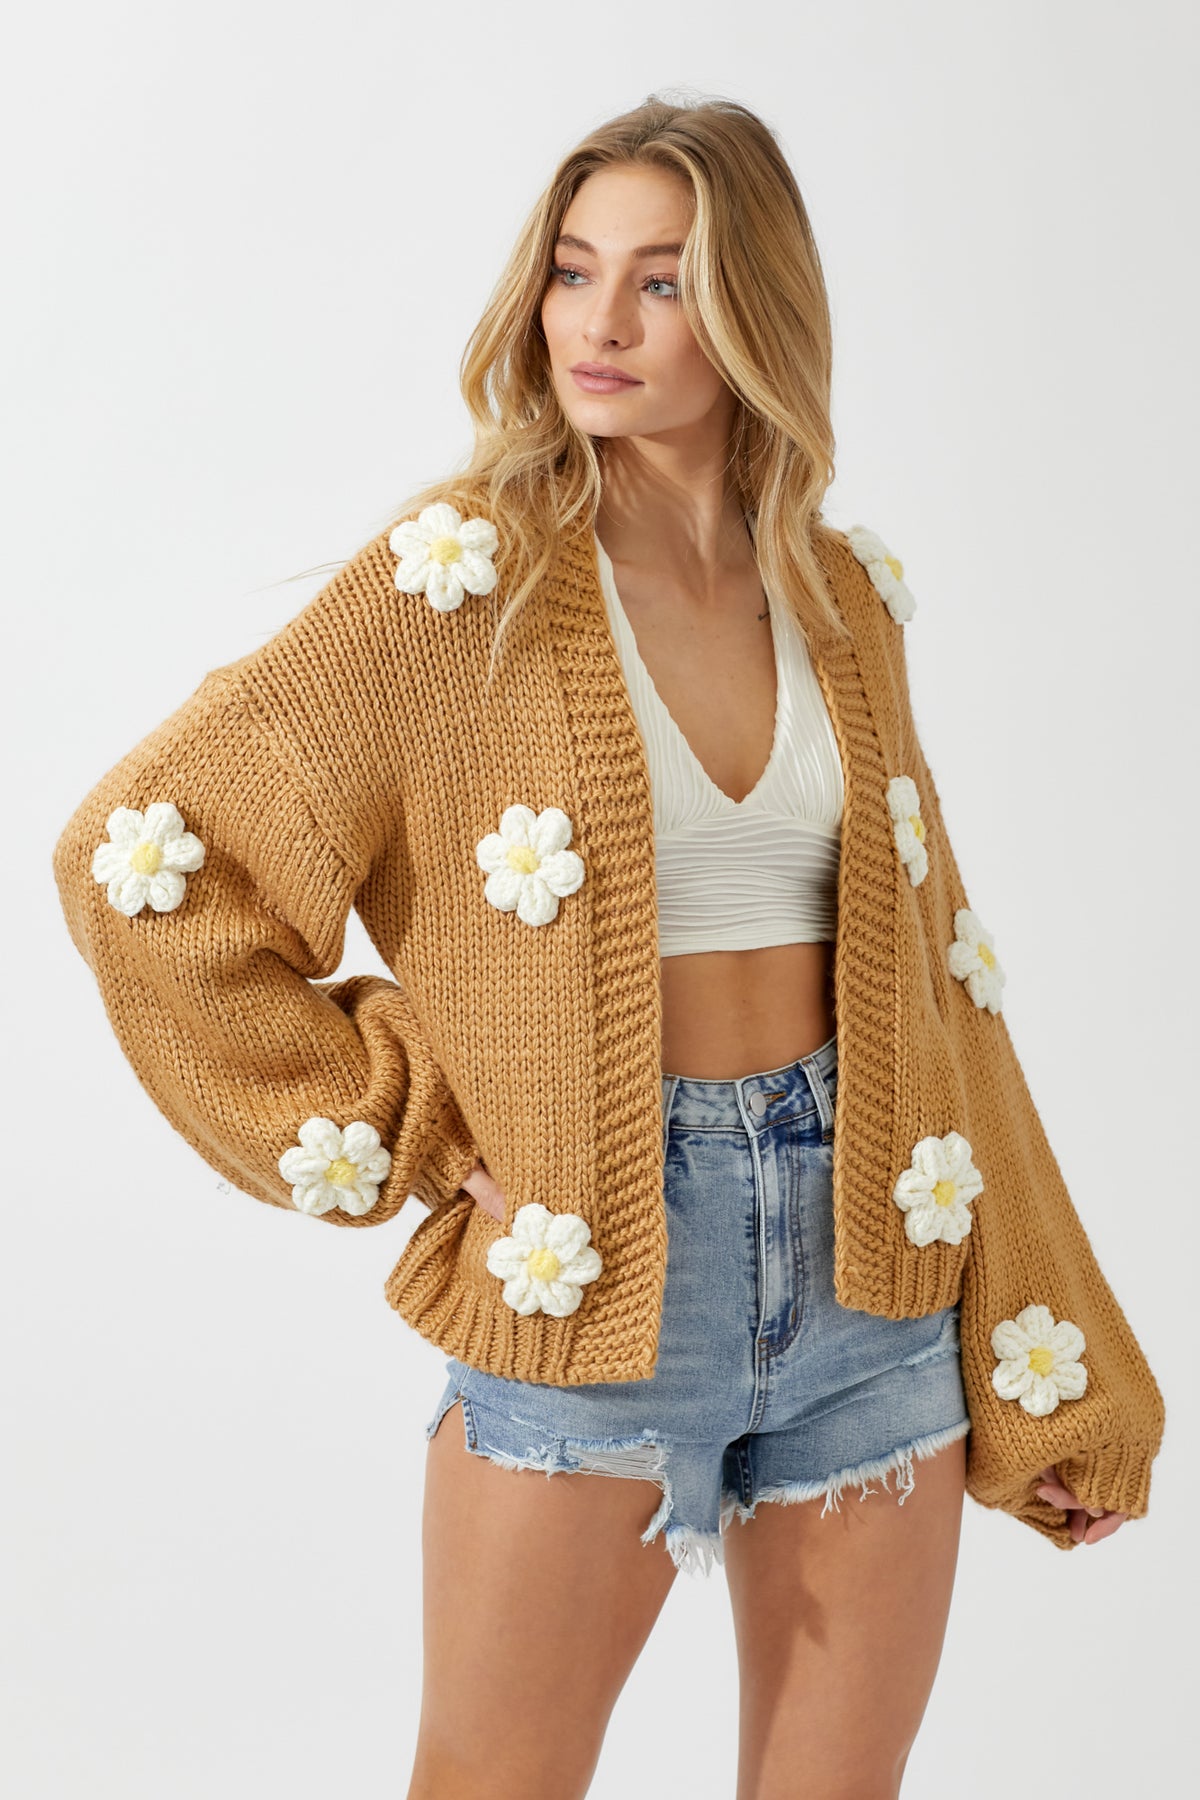 Come Into Bloom Cardigan - Camel